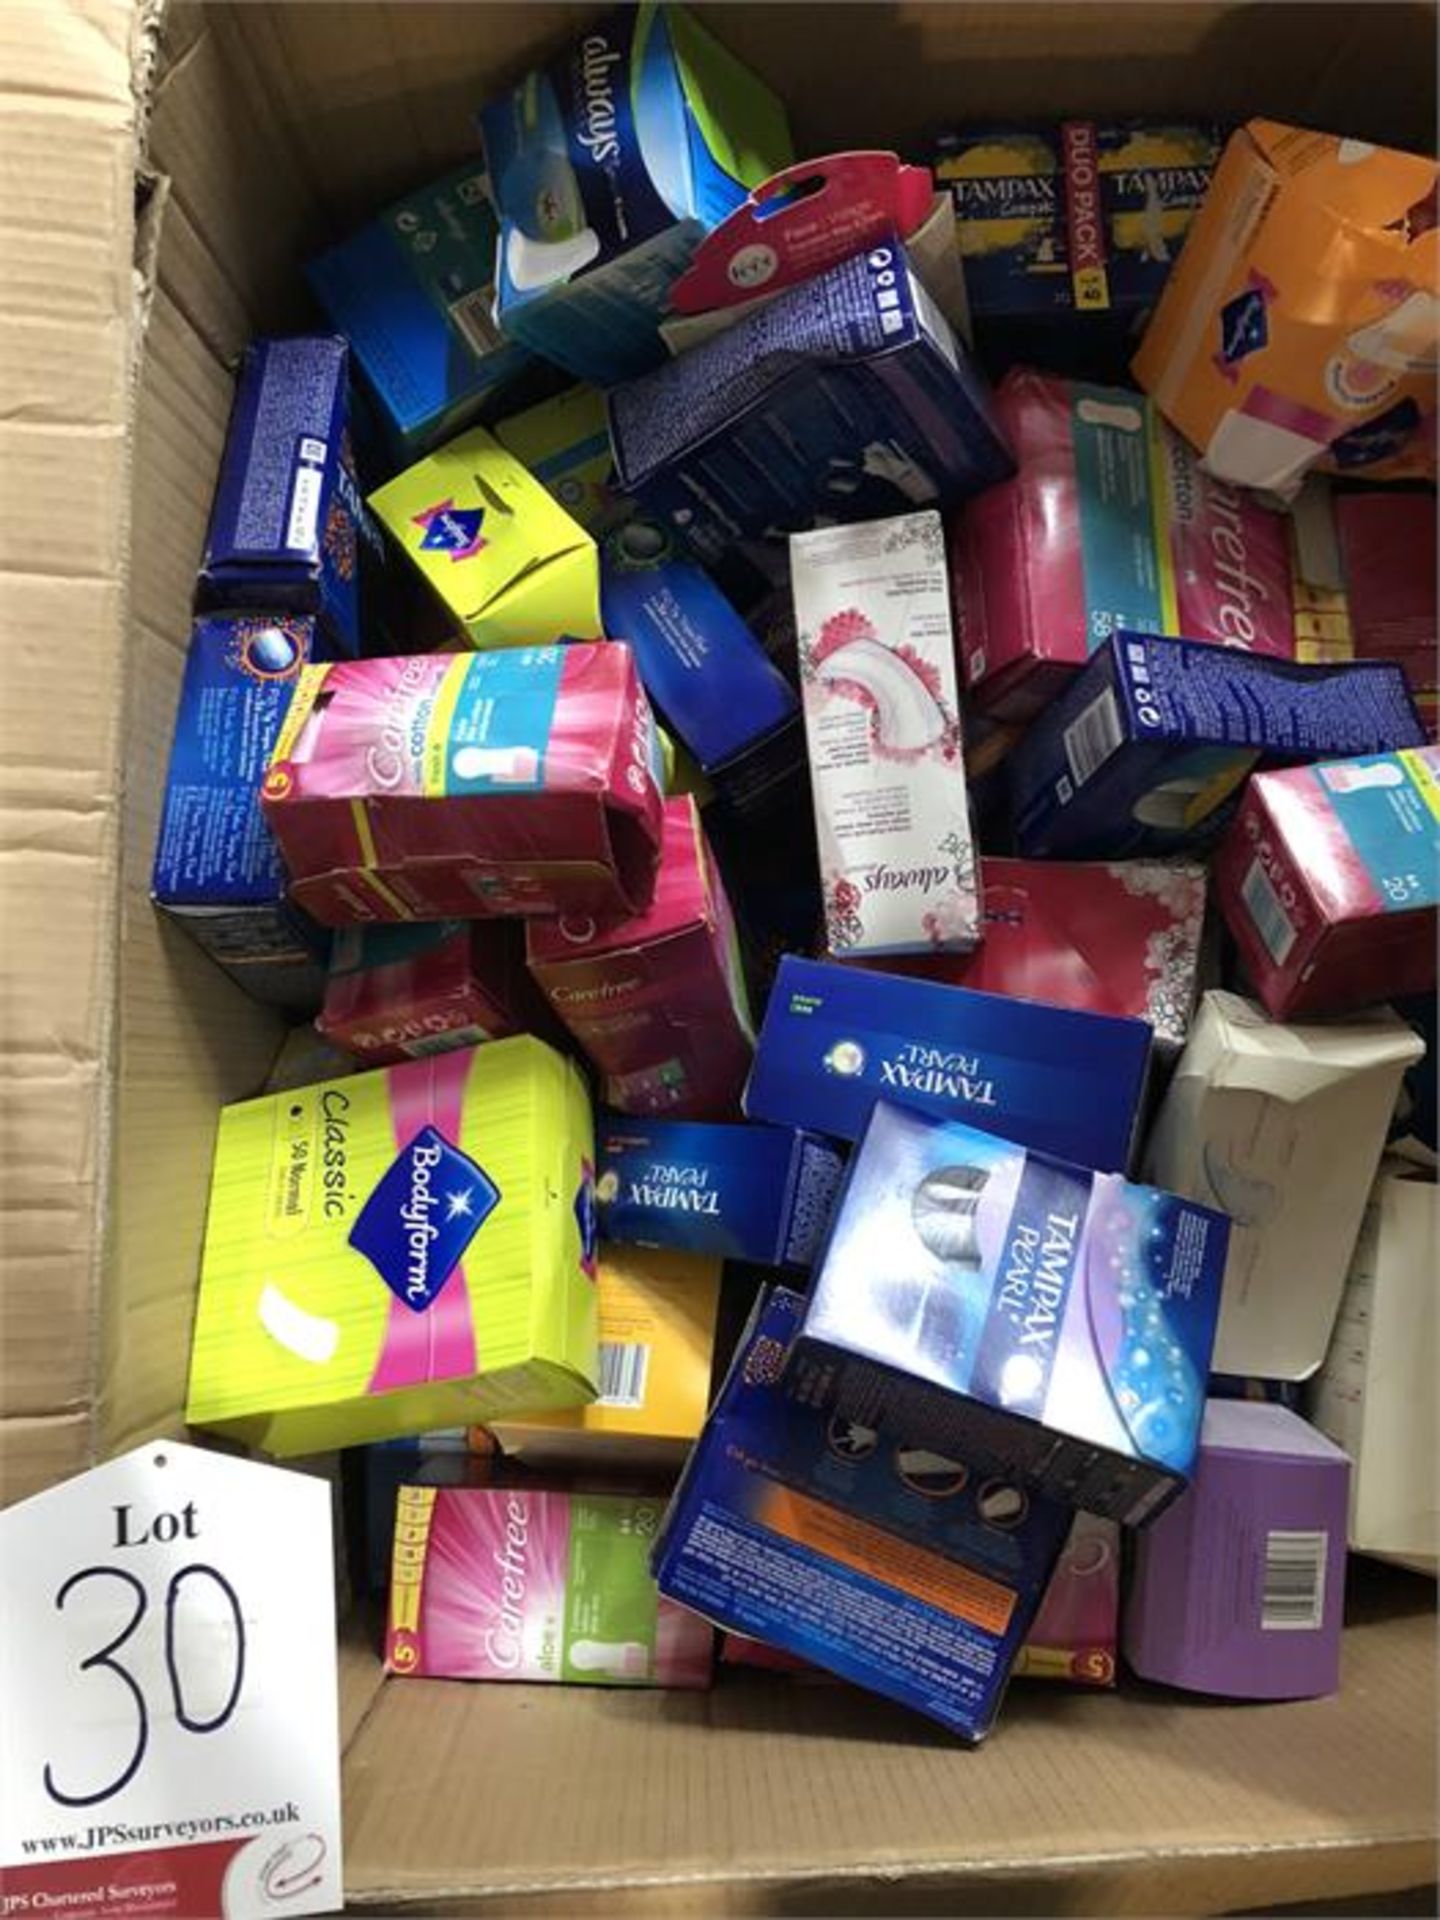 190 x Hair Removal Products/Women's Hygiene Products RRP £680 Retail Store Returns - Image 3 of 3